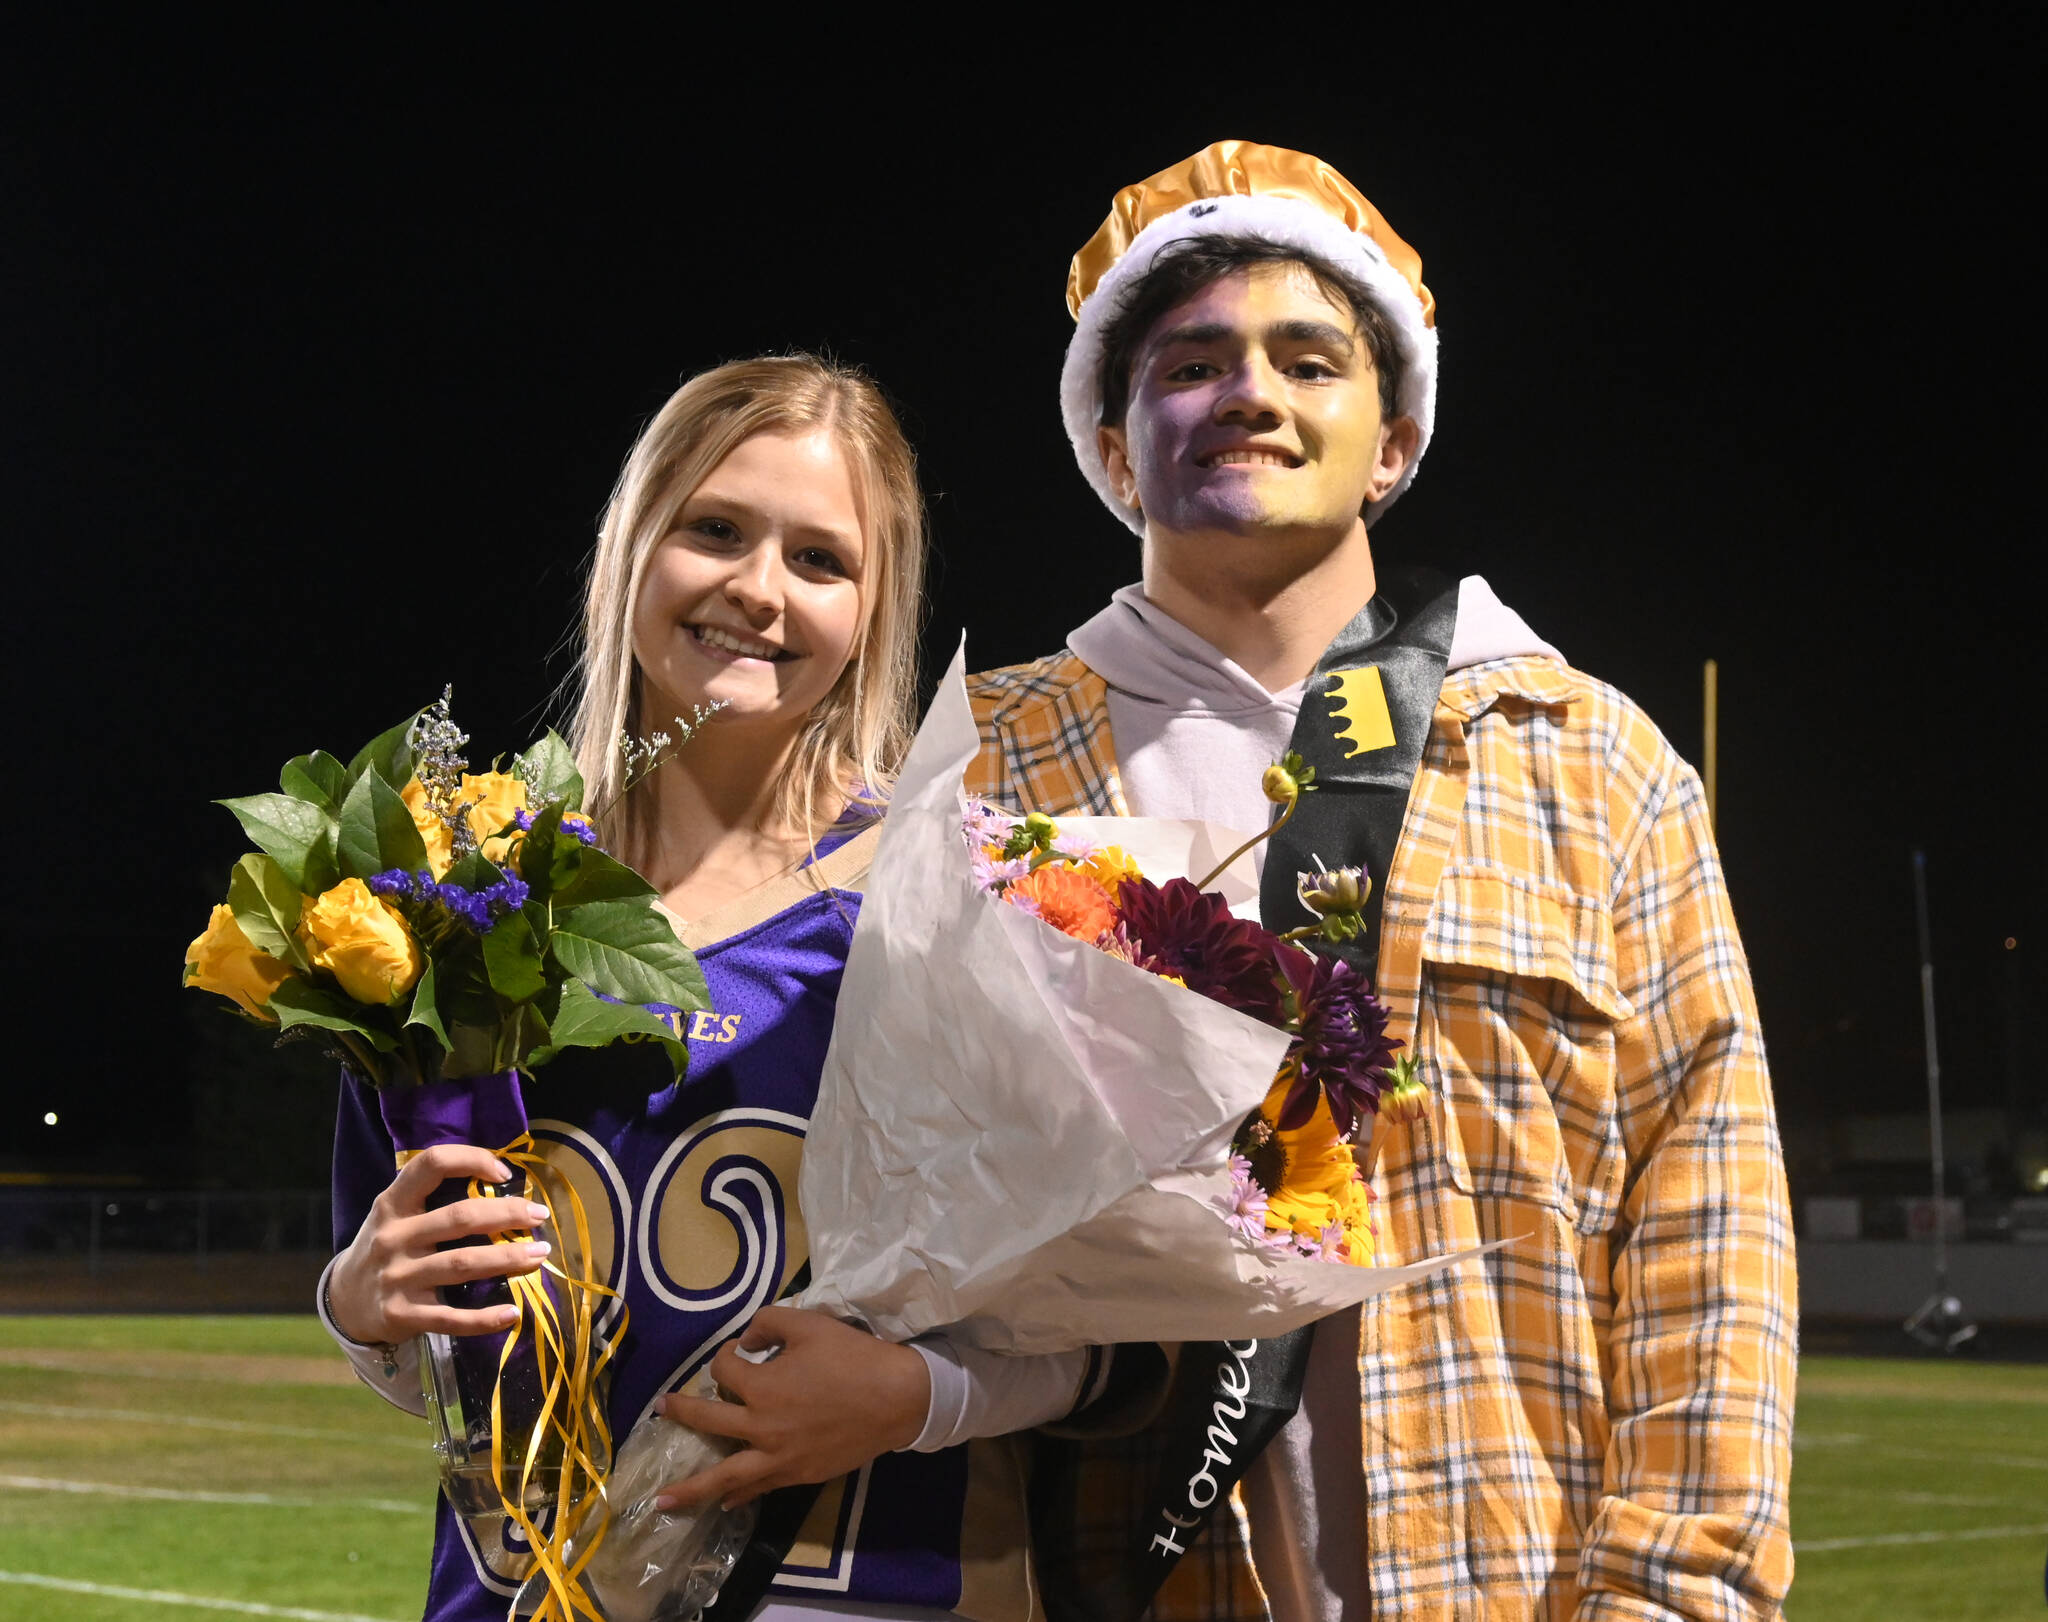 Sequim High’s 2022 Homecoming Queen and King, Claire D’Amico and Aaron Tolberd, are all smiles at halftime of the SHS football game on Sept. 30.